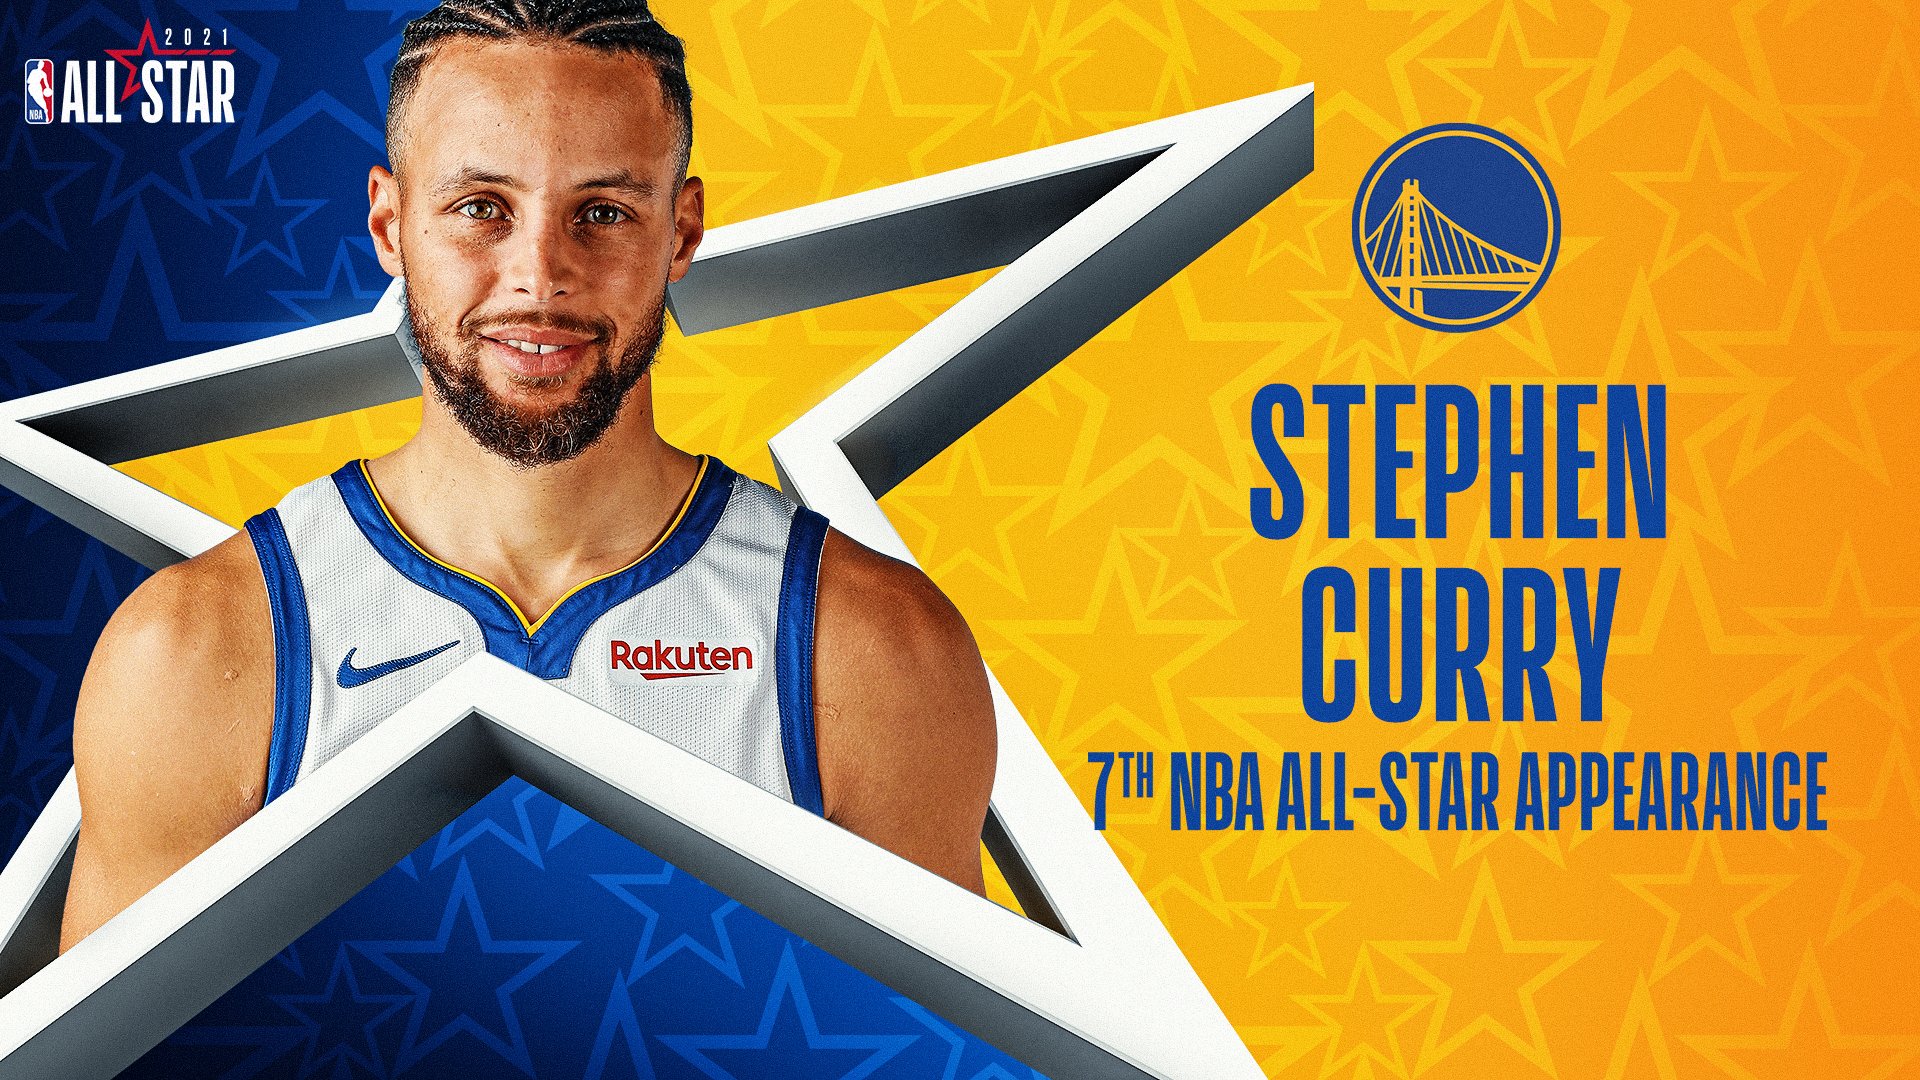 2021 NBA All-Star with Stephen Curry